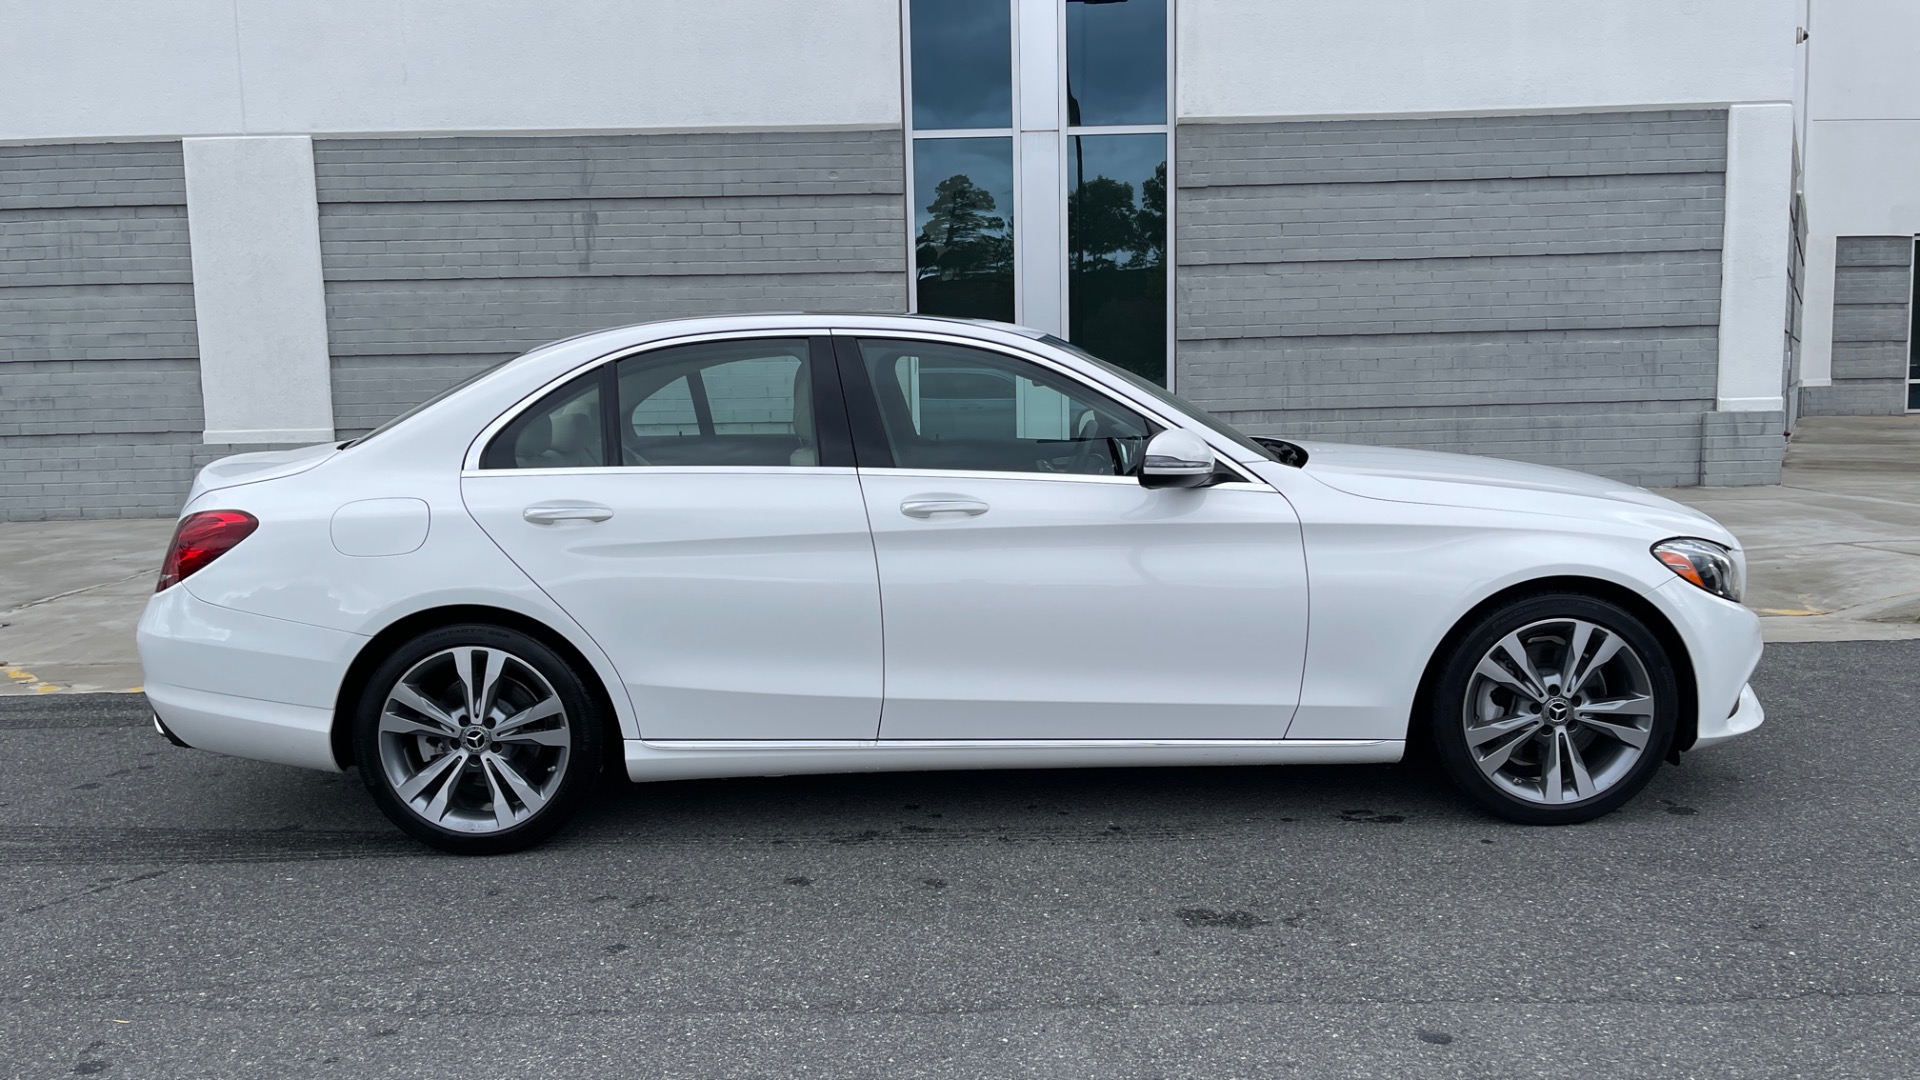 Used 2018 Mercedes-Benz C-Class C 300 / PREMIUM PACKAGE / 18IN WHEELS / HEATED FRONT SEATS / LED HEADLIGHTS for sale Sold at Formula Imports in Charlotte NC 28227 6